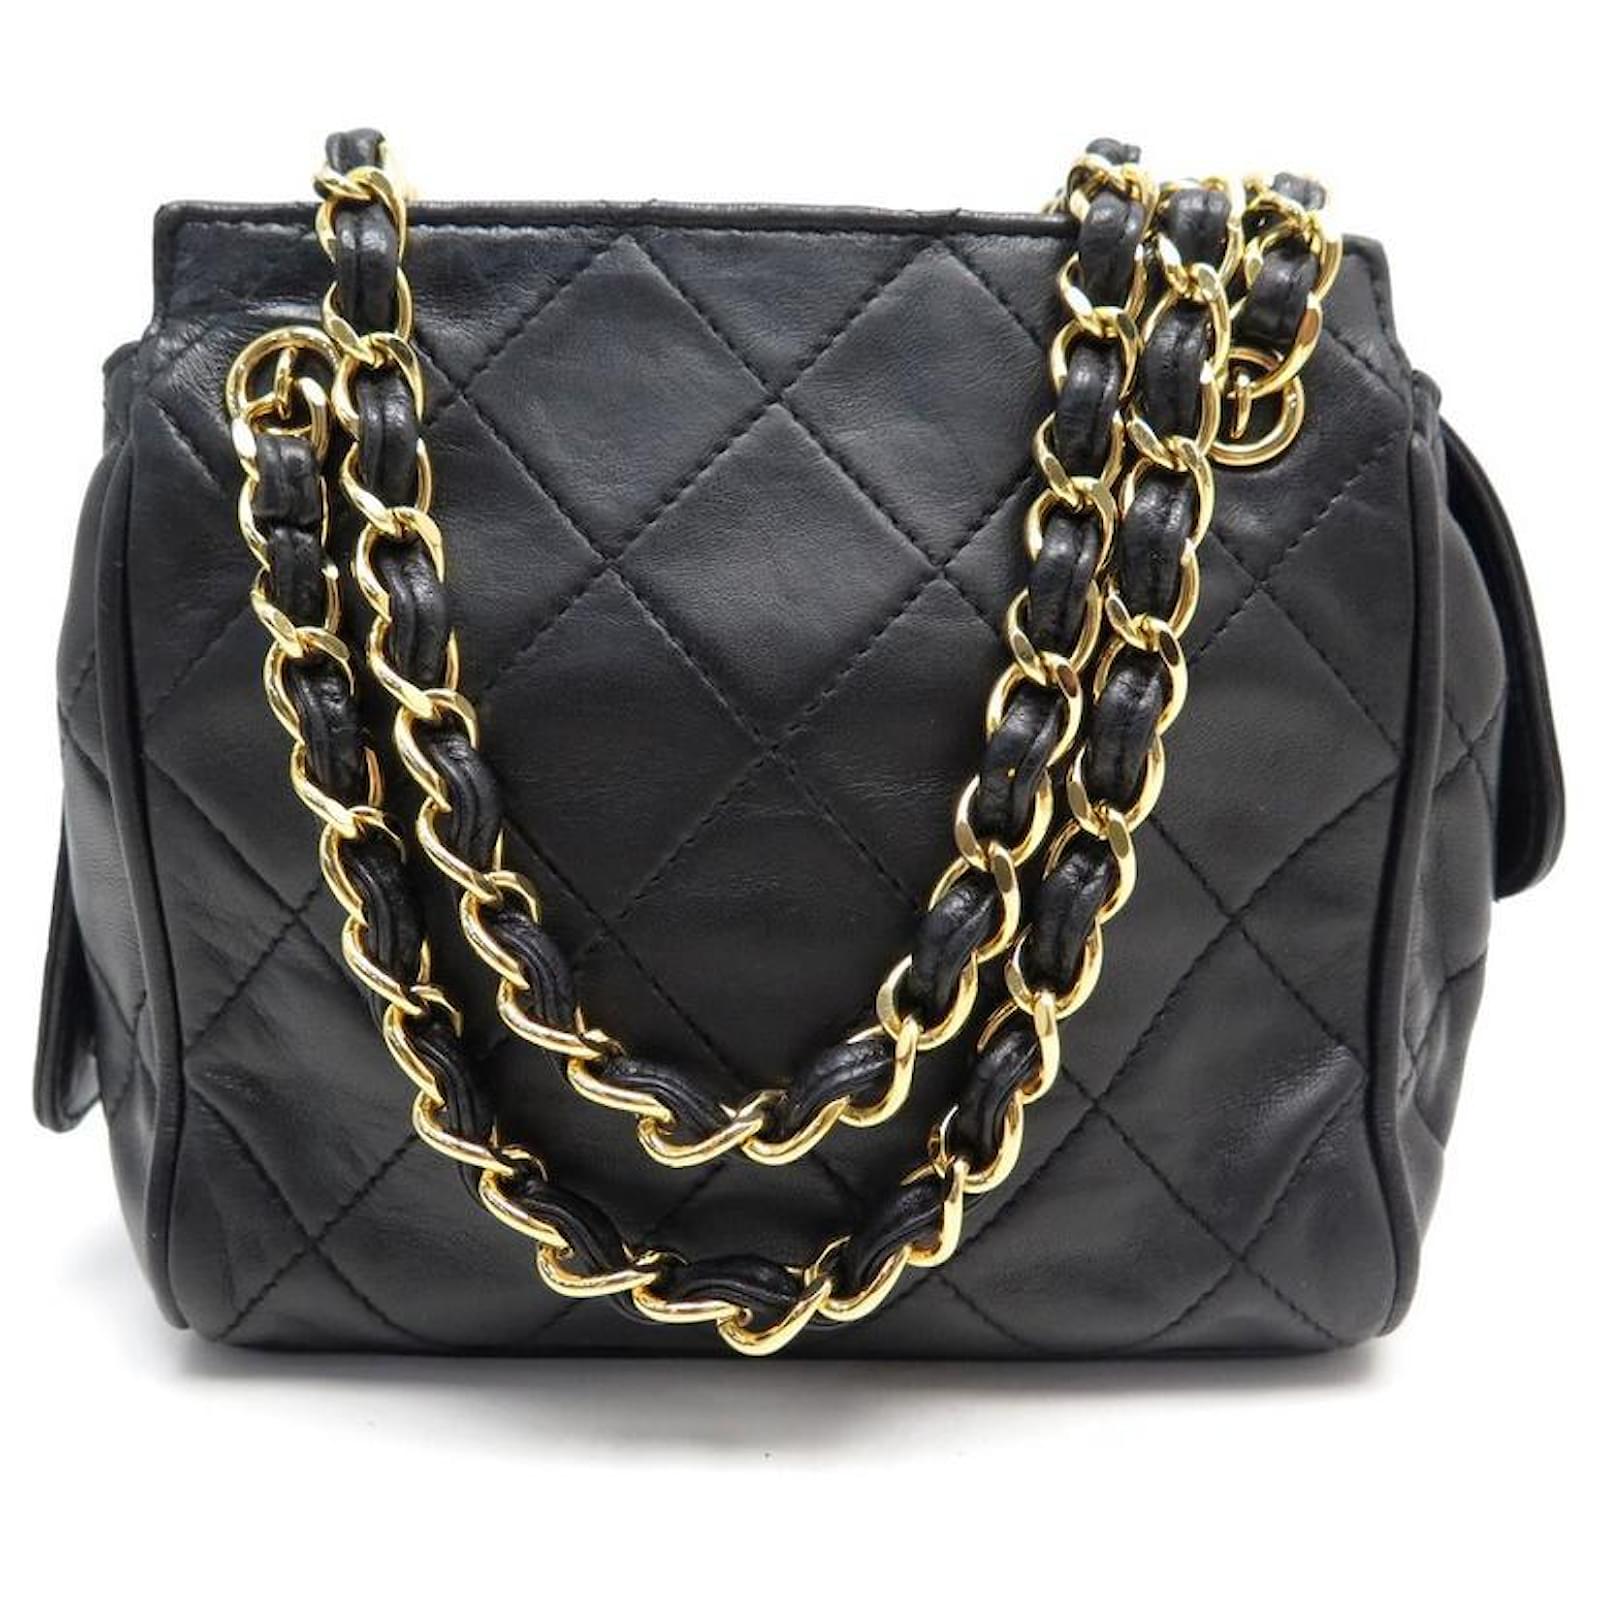 VINTAGE CHANEL MINI SHOPPING HANDBAG IN BLACK QUILTED LEATHER